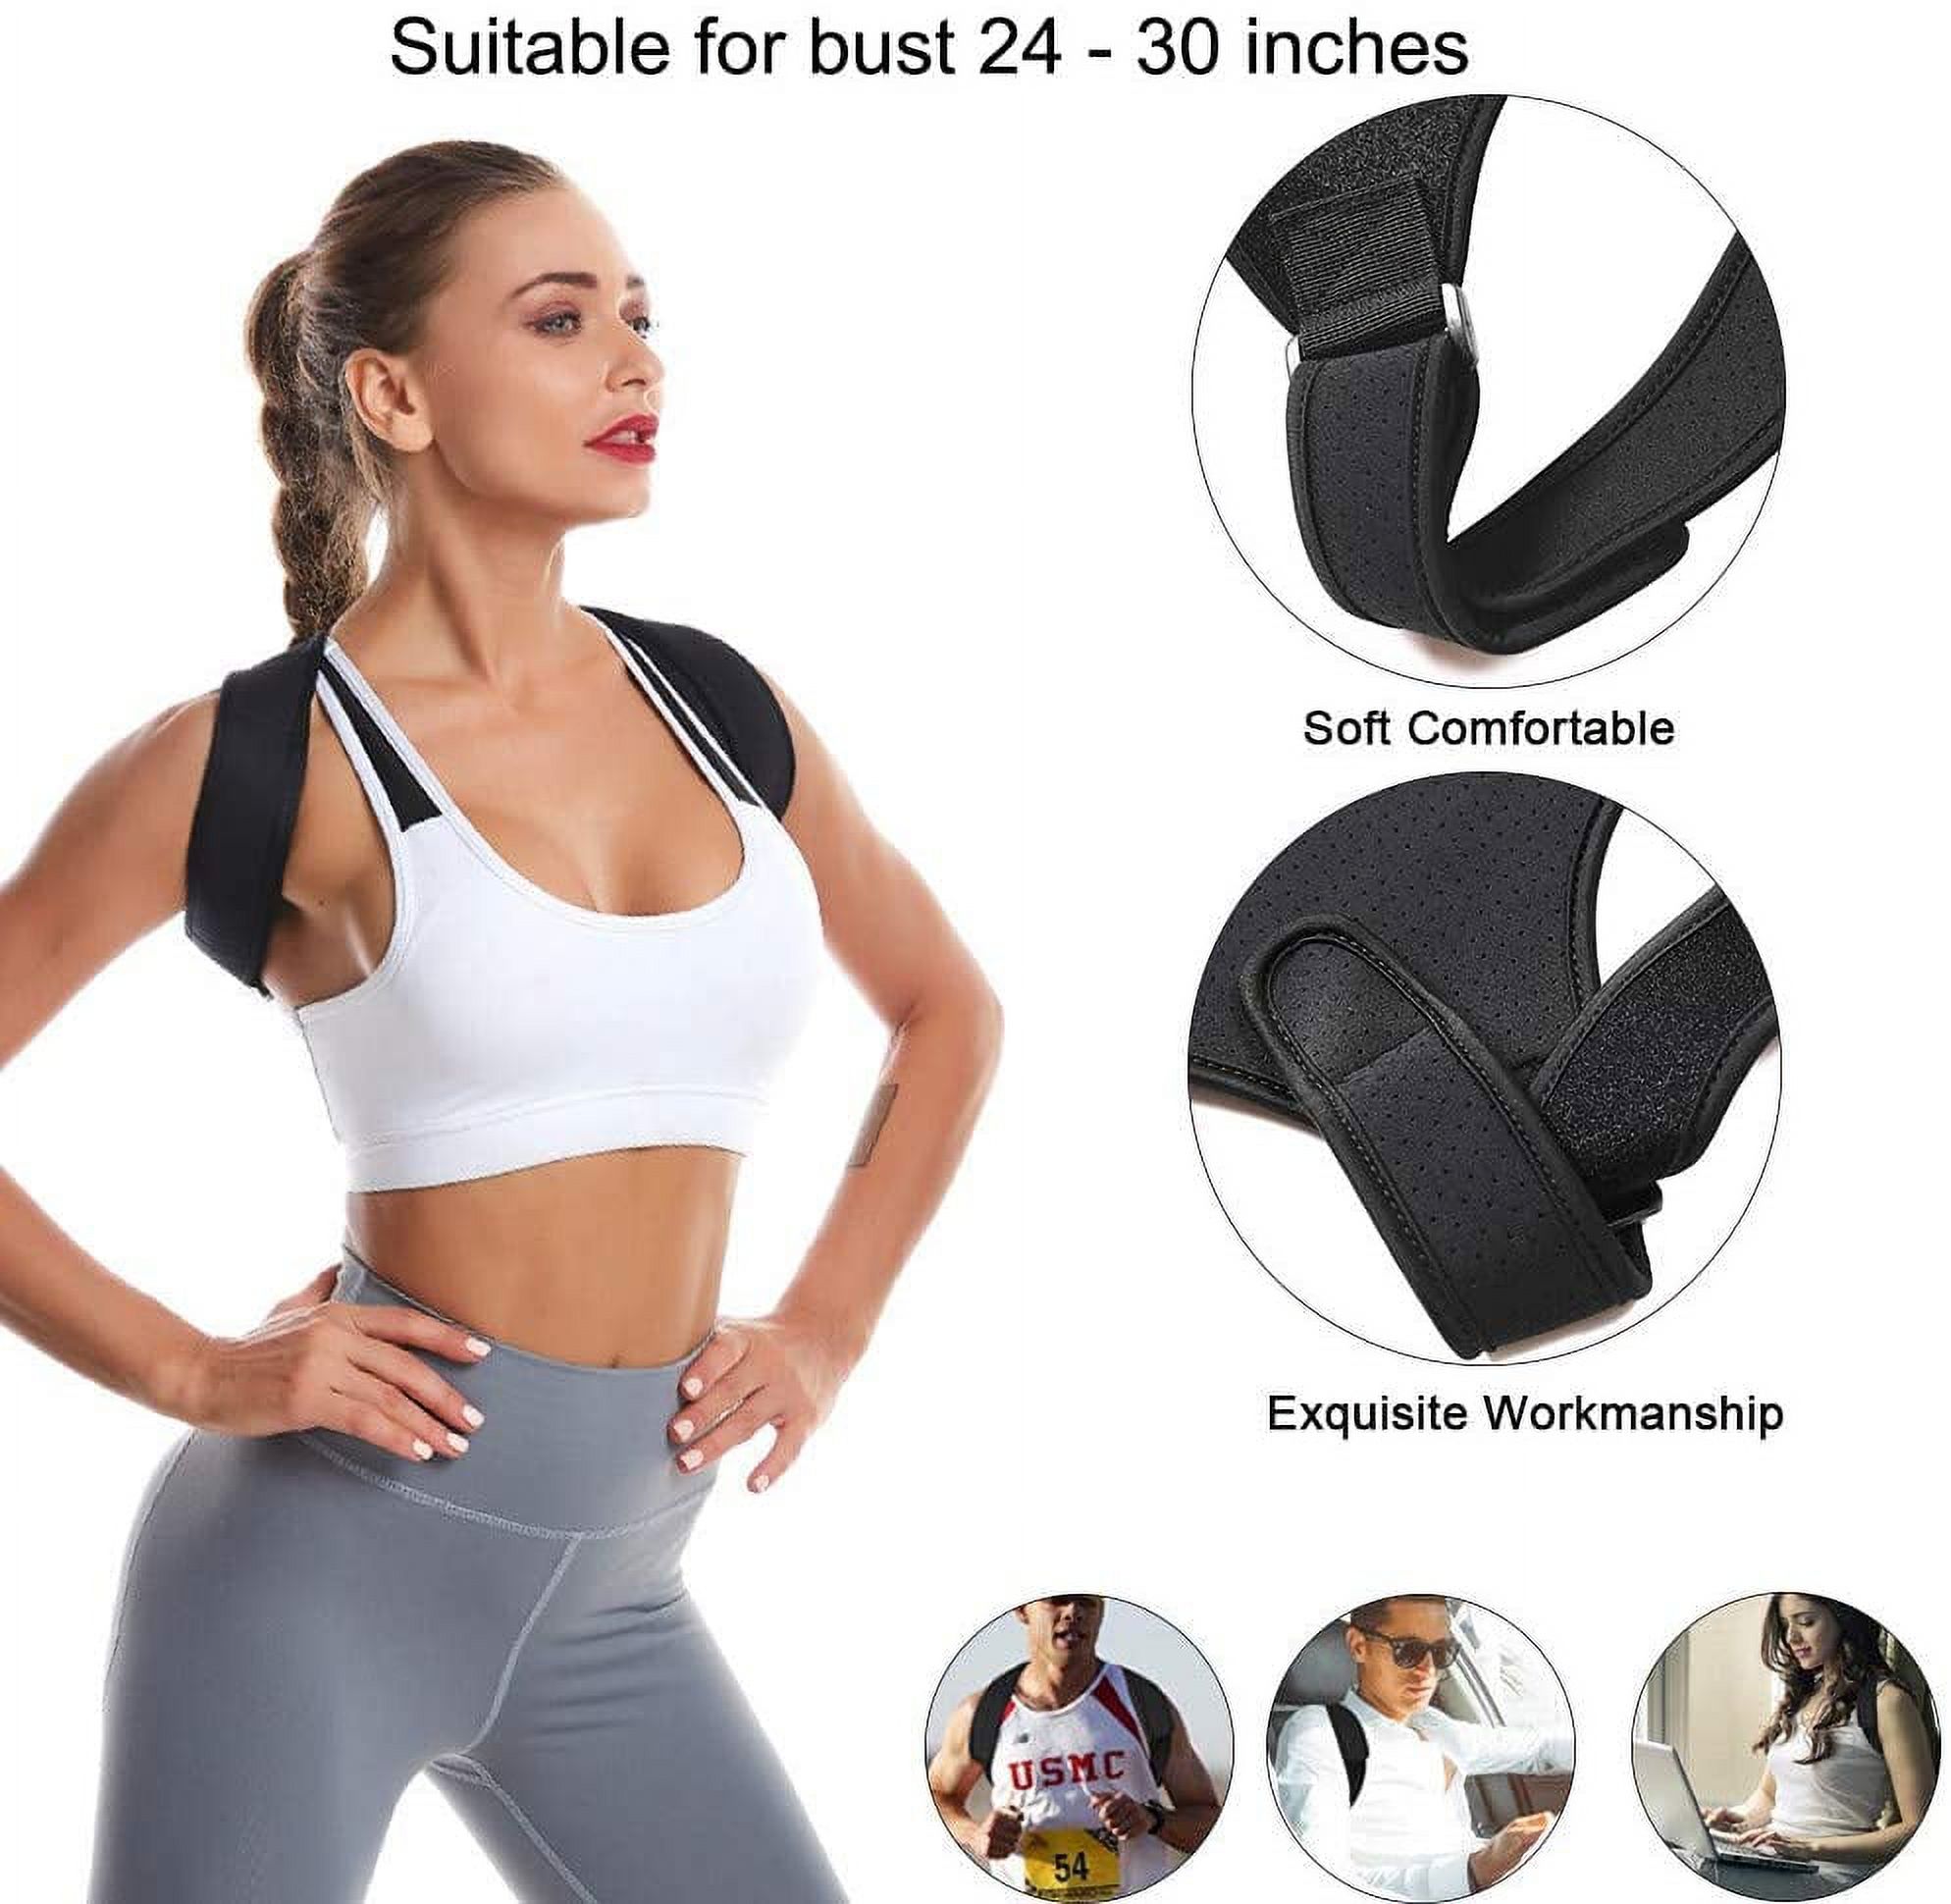 Posture Corrector for Women and Men - Adjustable Upper Back Brace - for Support and Providing Pain Relief from Neck,Back and Shoulder, Improve Eliminate Bad Posture for Correct Posture - image 4 of 6